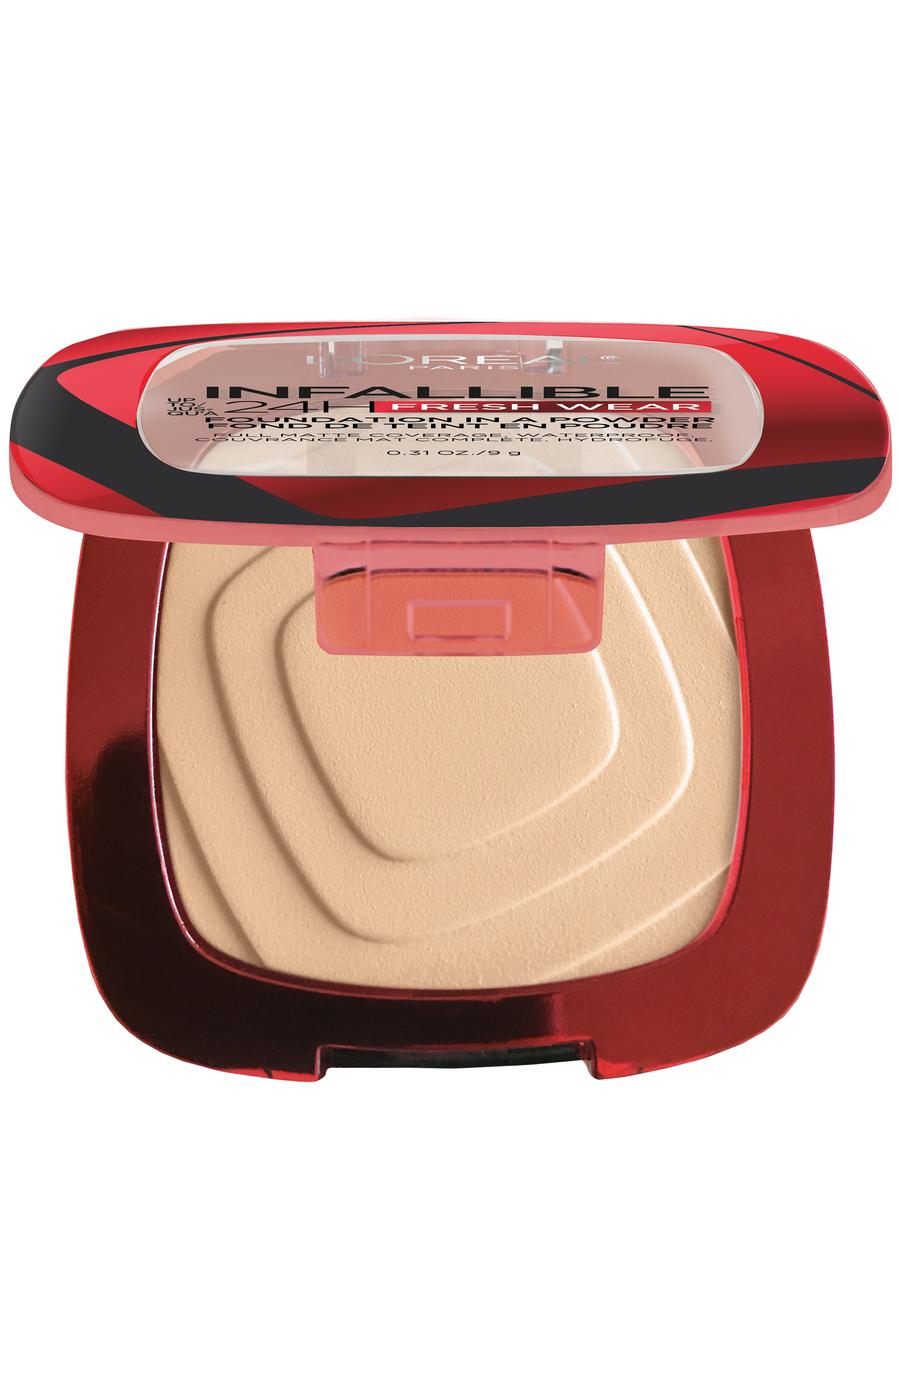 L'Oréal Paris Infallible Up to 24H Fresh Wear Foundation in a Powder Ivory Buff; image 4 of 4